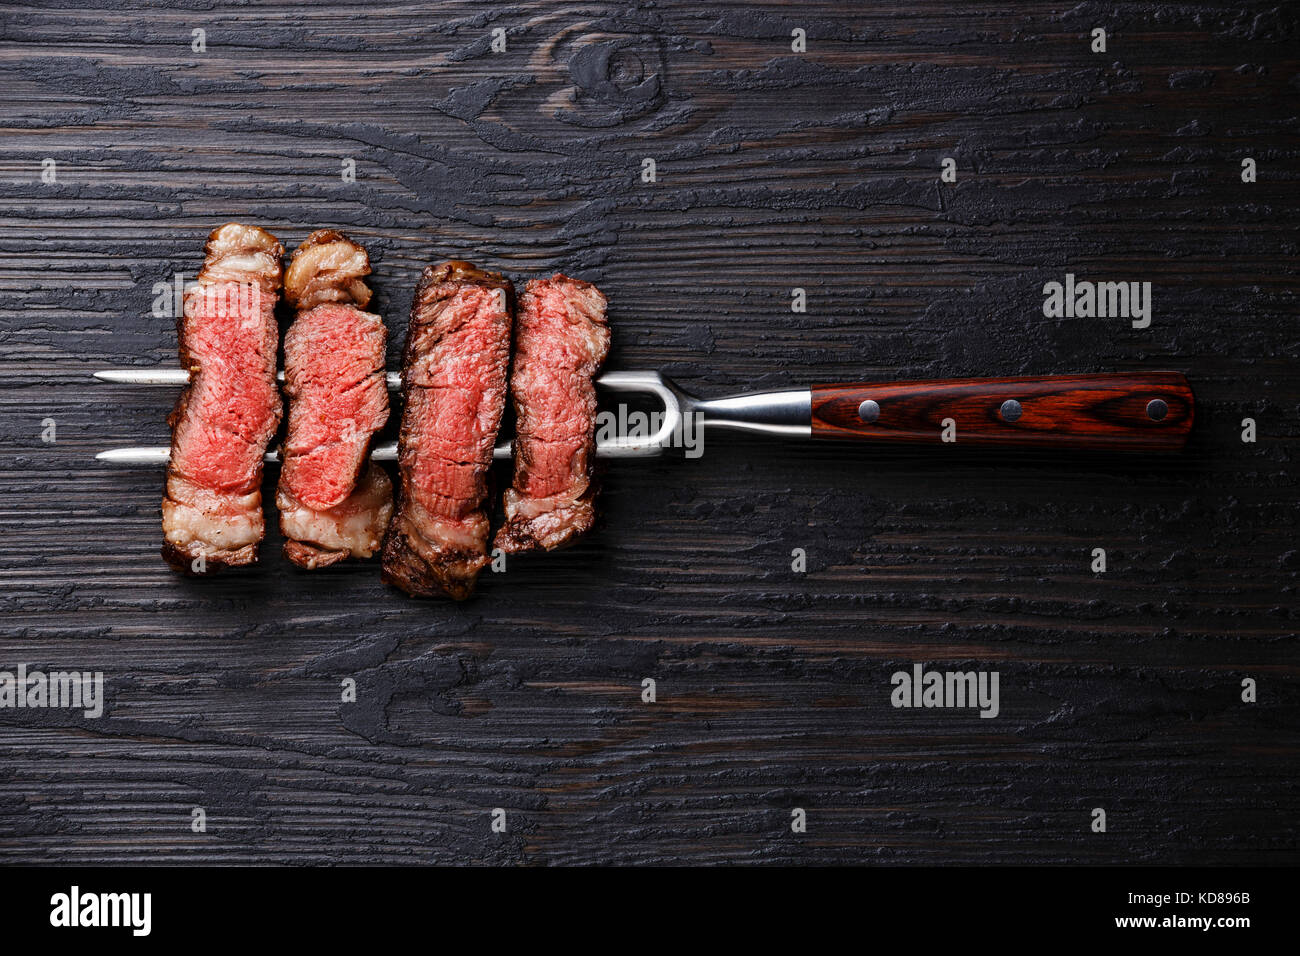 Slices of grilled meat barbecue steak Rib eye on meat fork on burned black wooden background Stock Photo